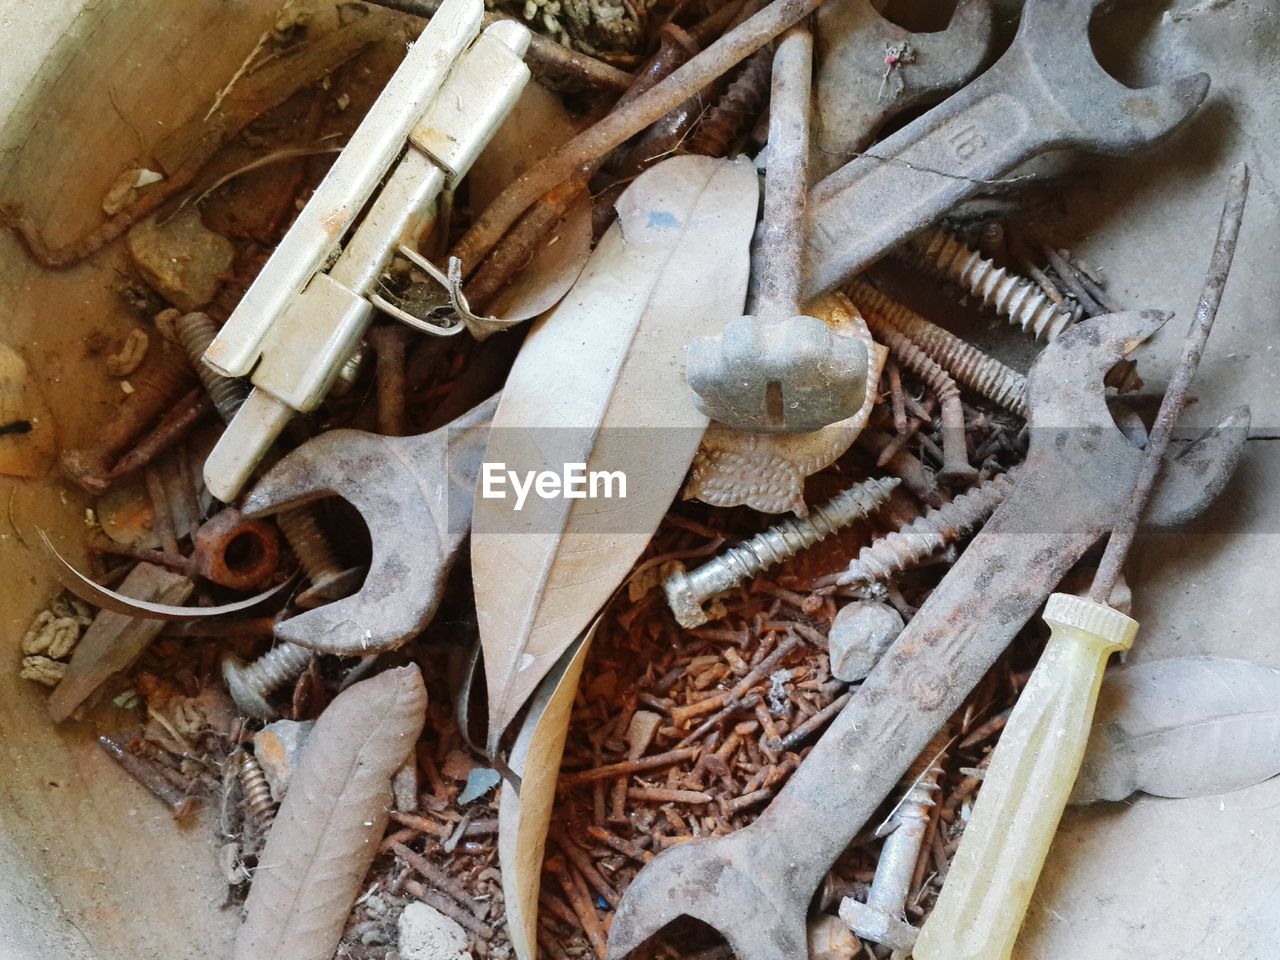 High angle view of tools in box